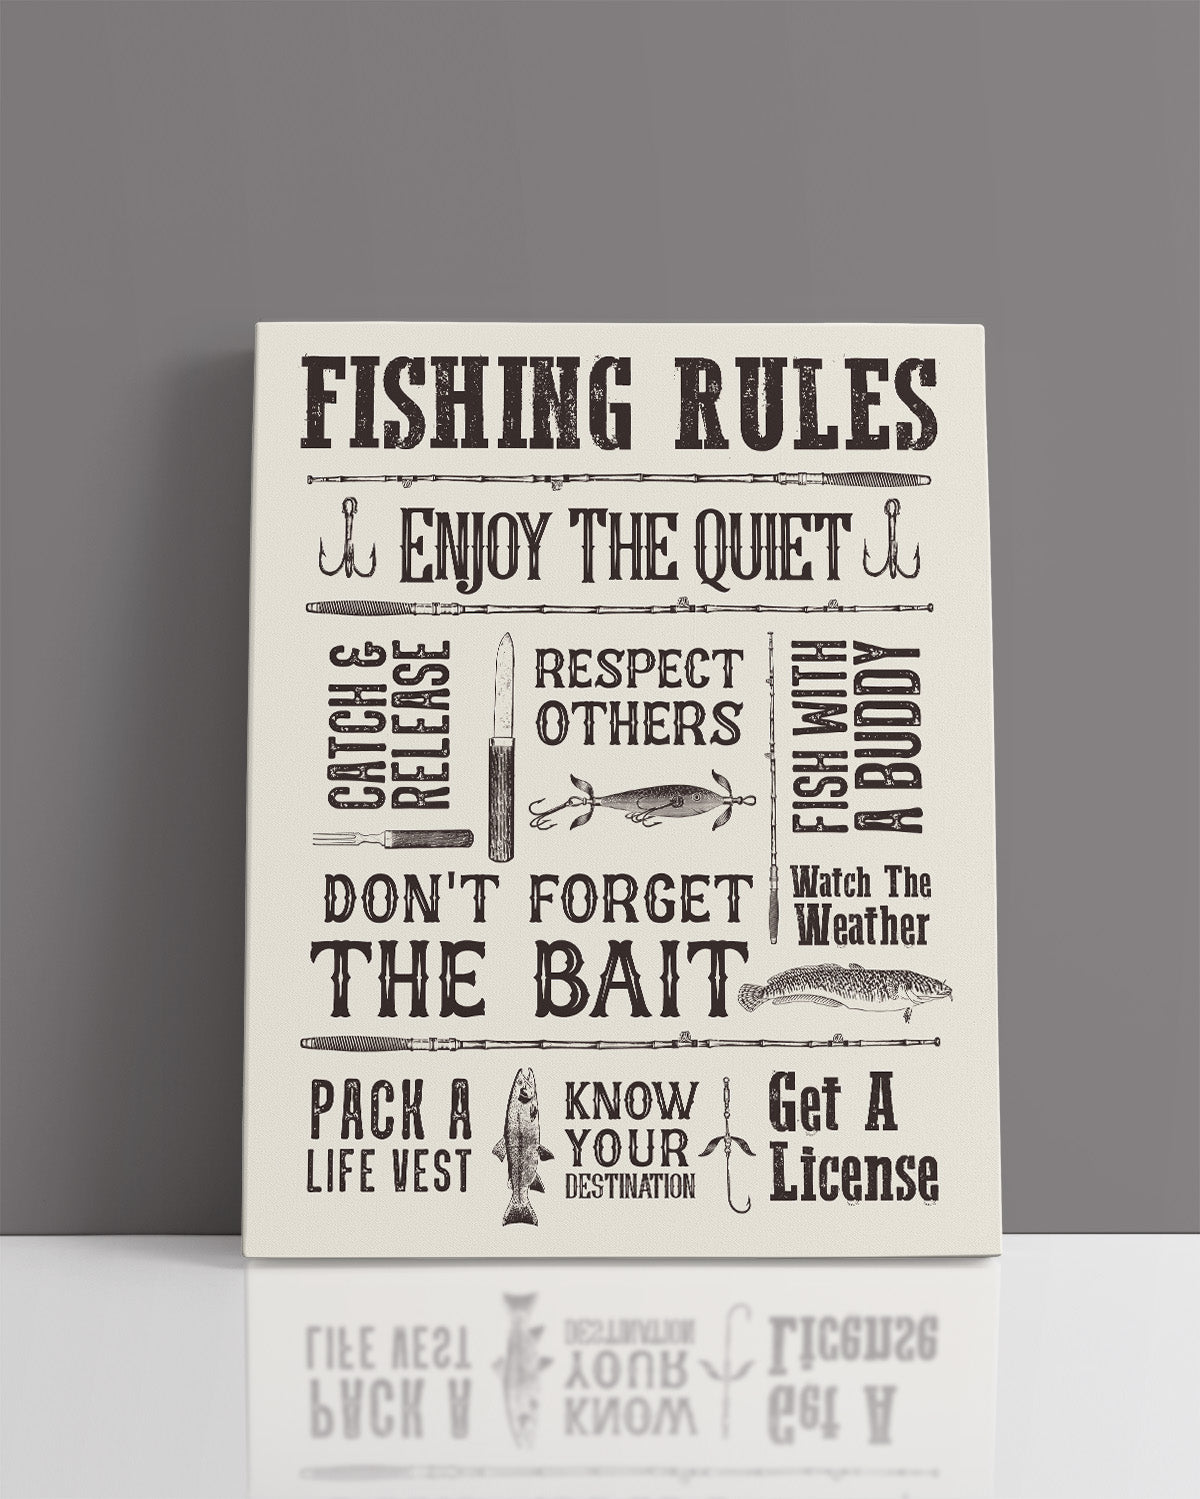 Fishing Rules - Great gift for fishing enthusiasts - fishing-themed artwork